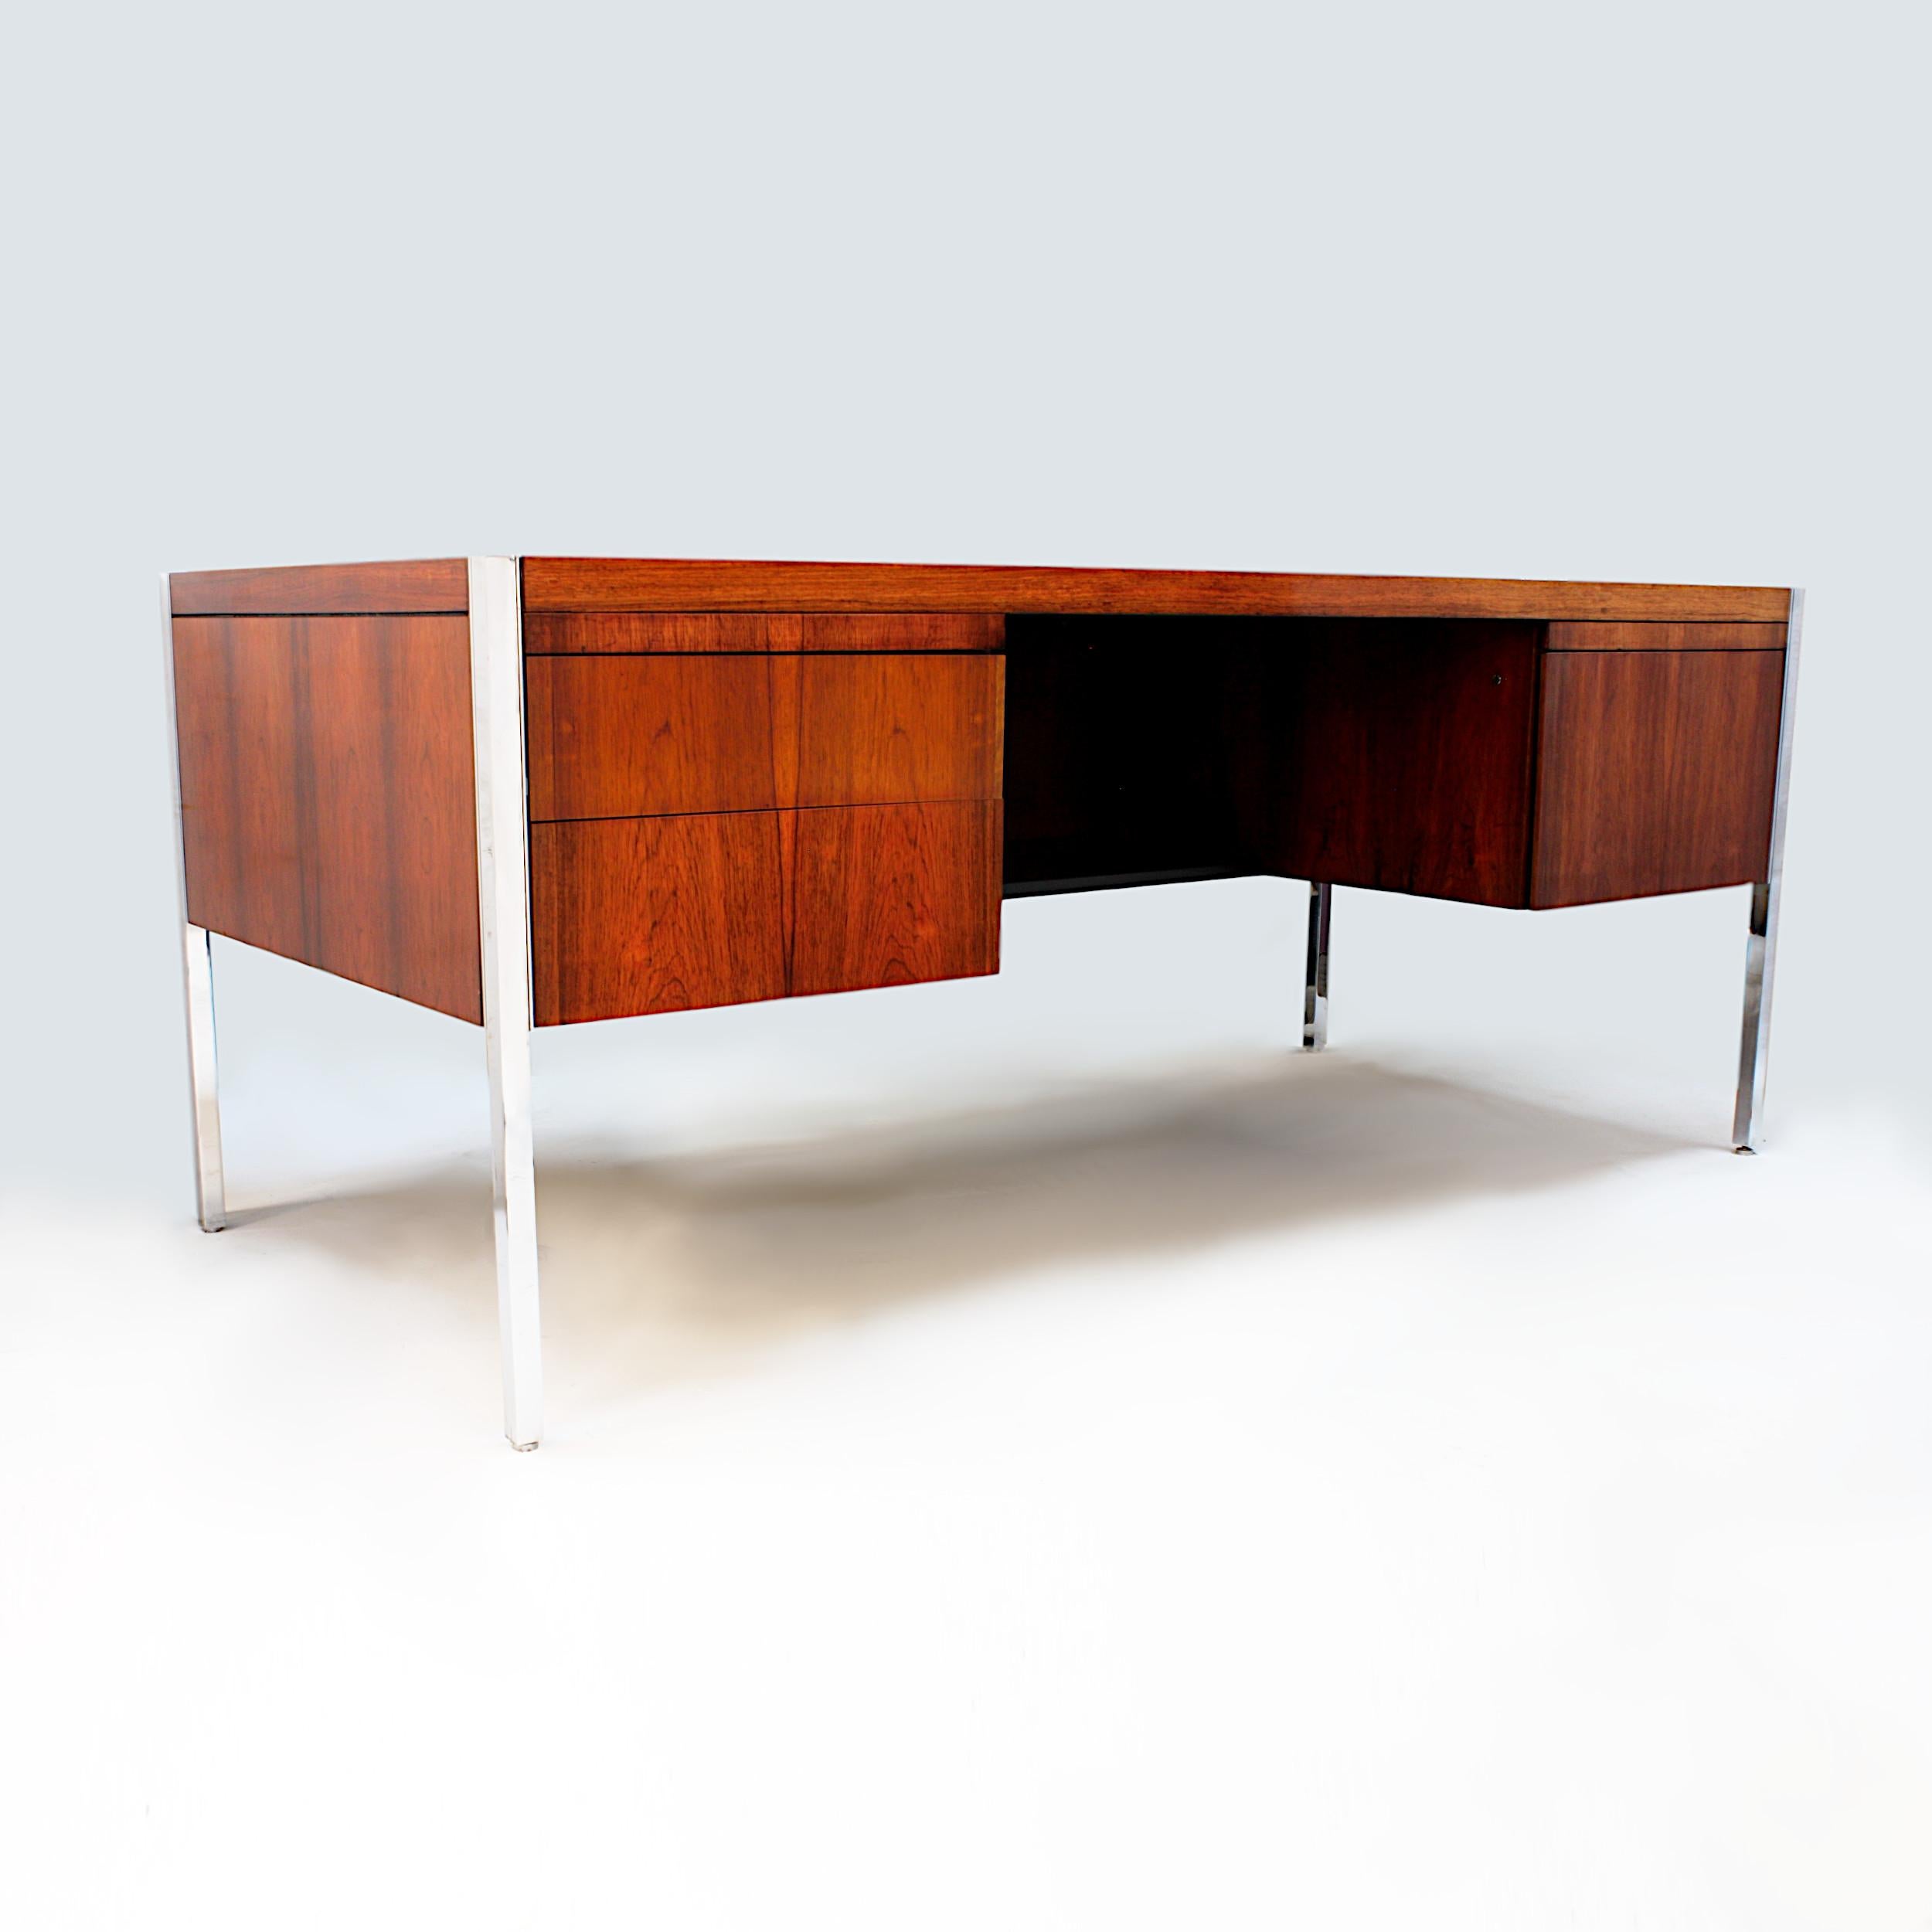 Impressive 1970s vintage executive desk by Richard Schultz for Knoll Associates Inc. Desk features gorgeous rosewood veneer, chrome legs, and unique chrome inlay accents to top. With its Minimalist lines that lets the materials and renowned Knoll